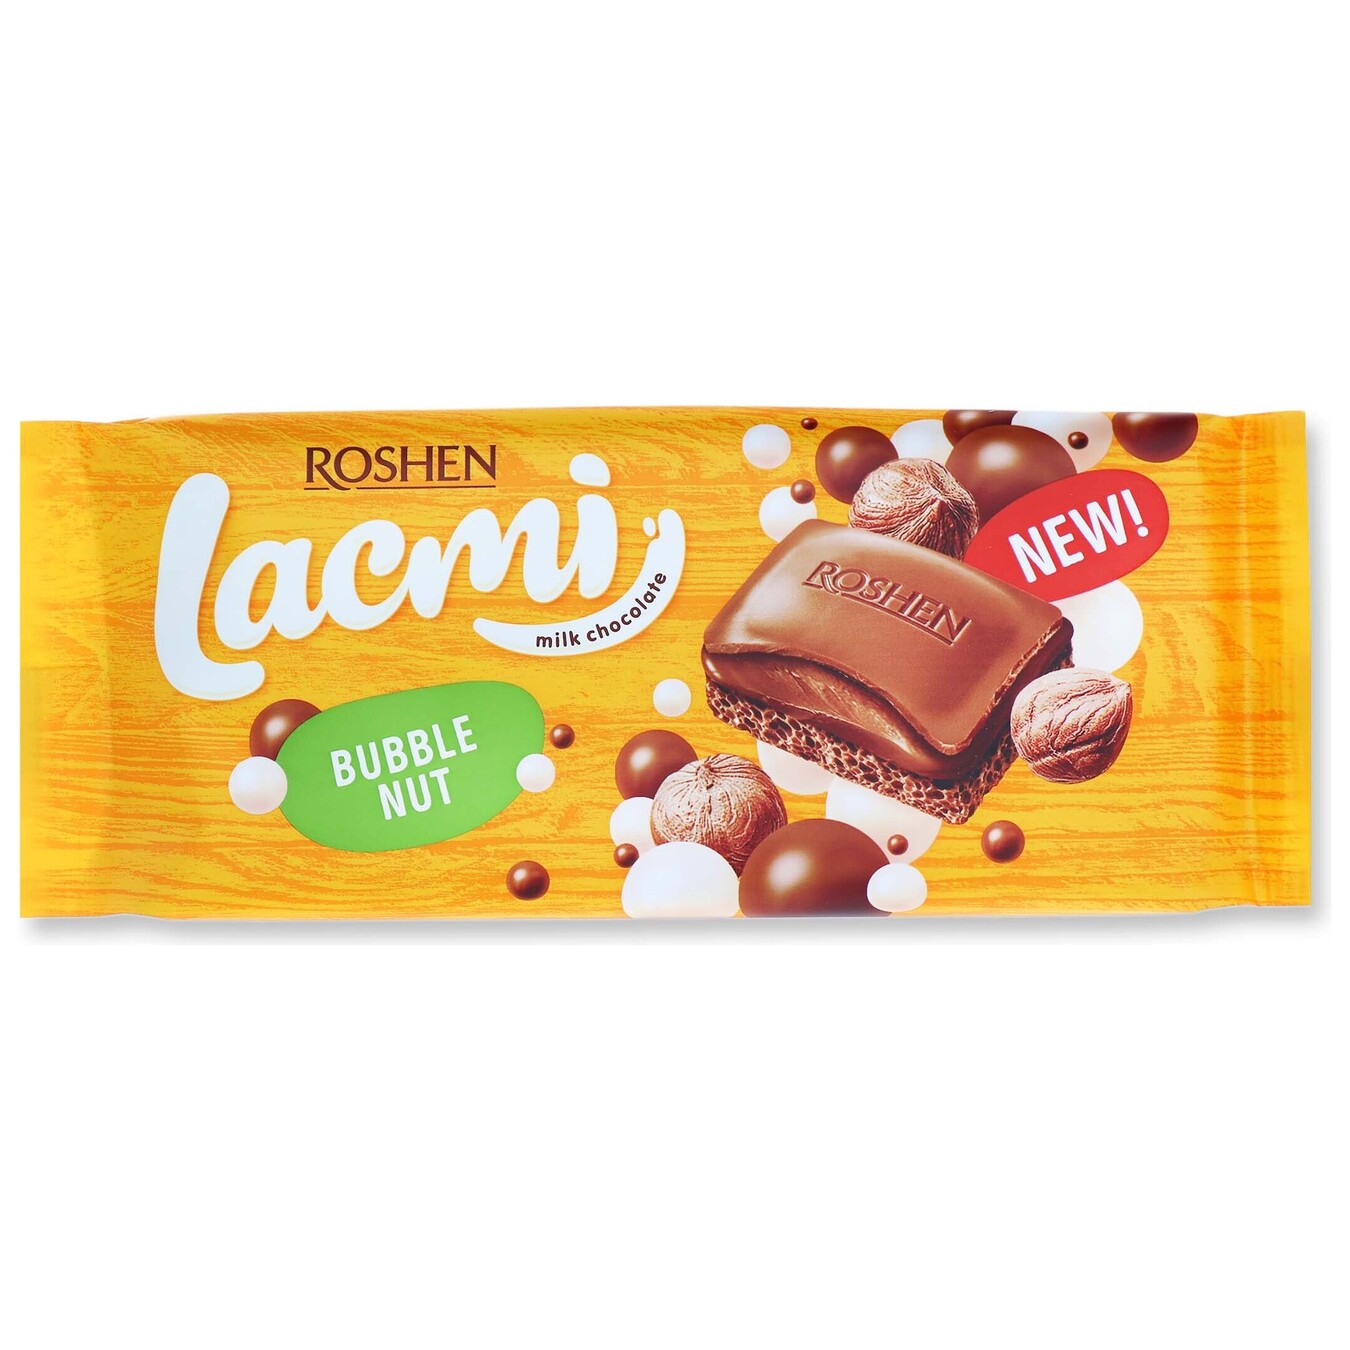 Roshen Lacmi Bubble Nut milk porous chocolate with chocolate-nut filling 85g